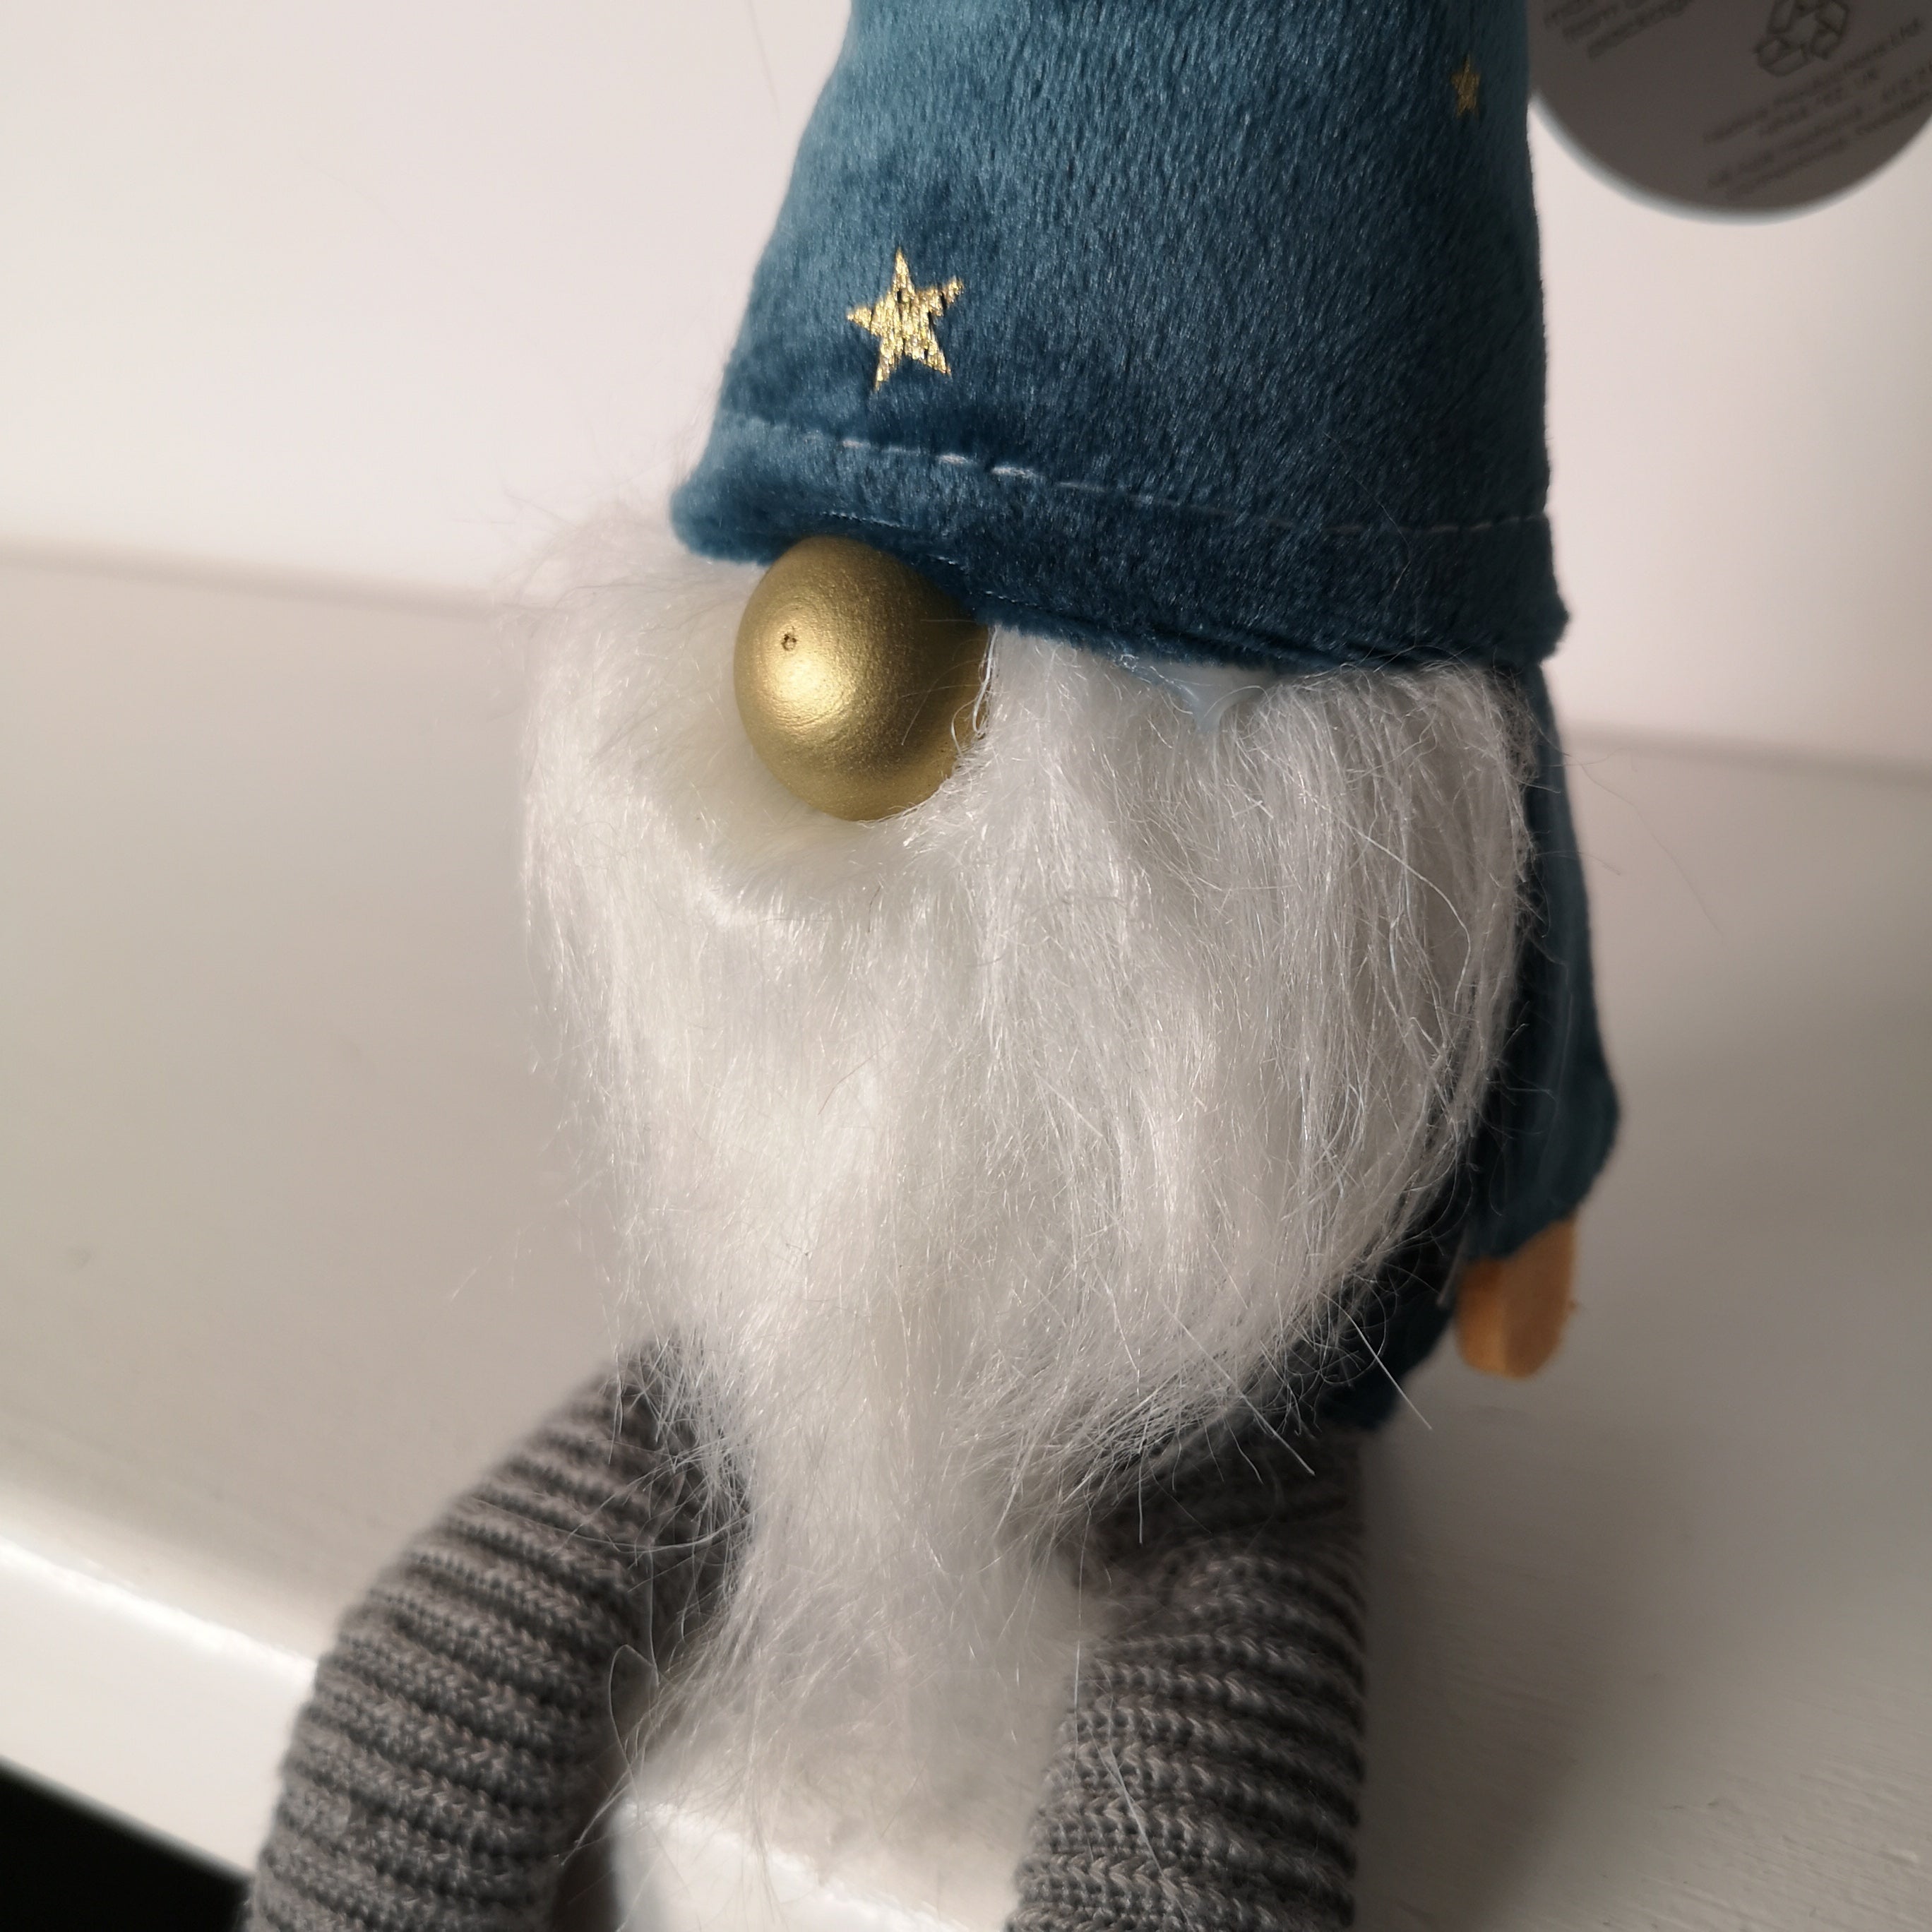 20cm Christmas Gonk Decoration with Starry Hat and Dangly Legs in Teal